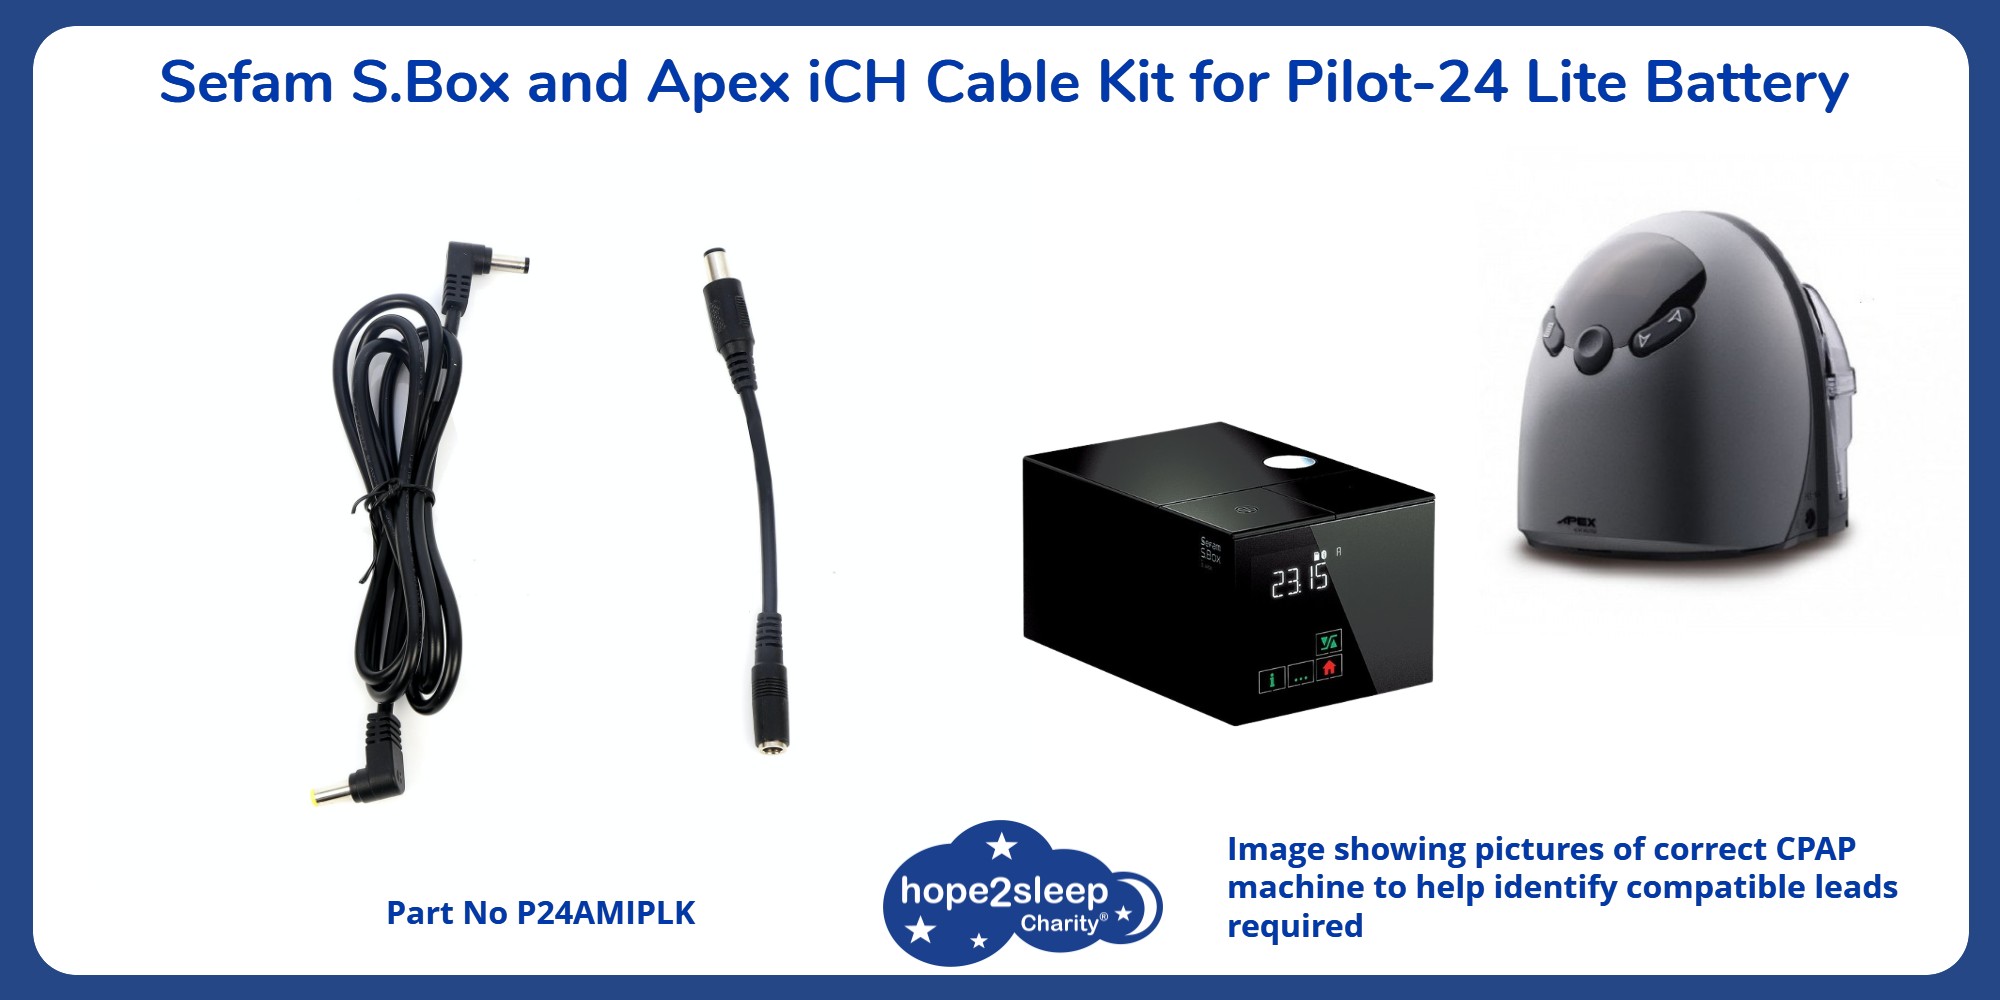 S.Box and iCH Cable Kit for Pilot-24 Battery